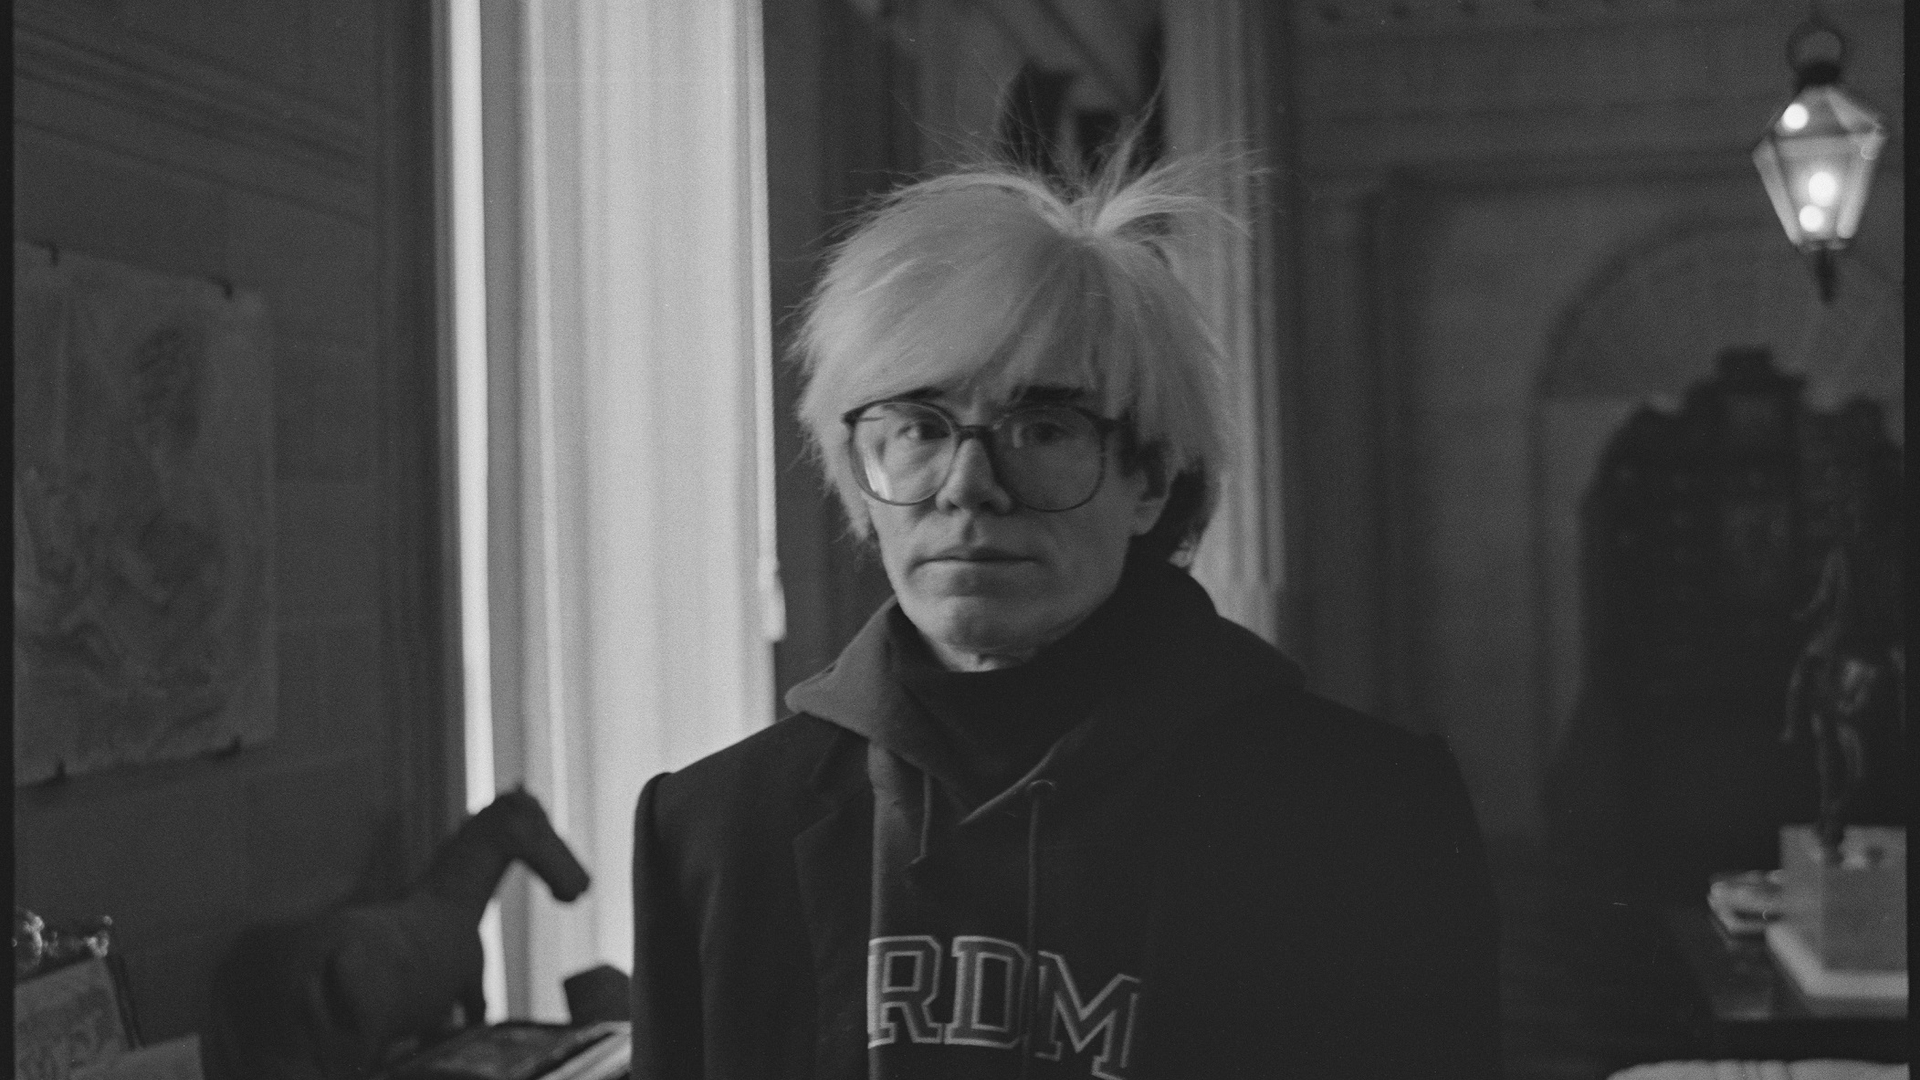 The Andy Warhol Diaries